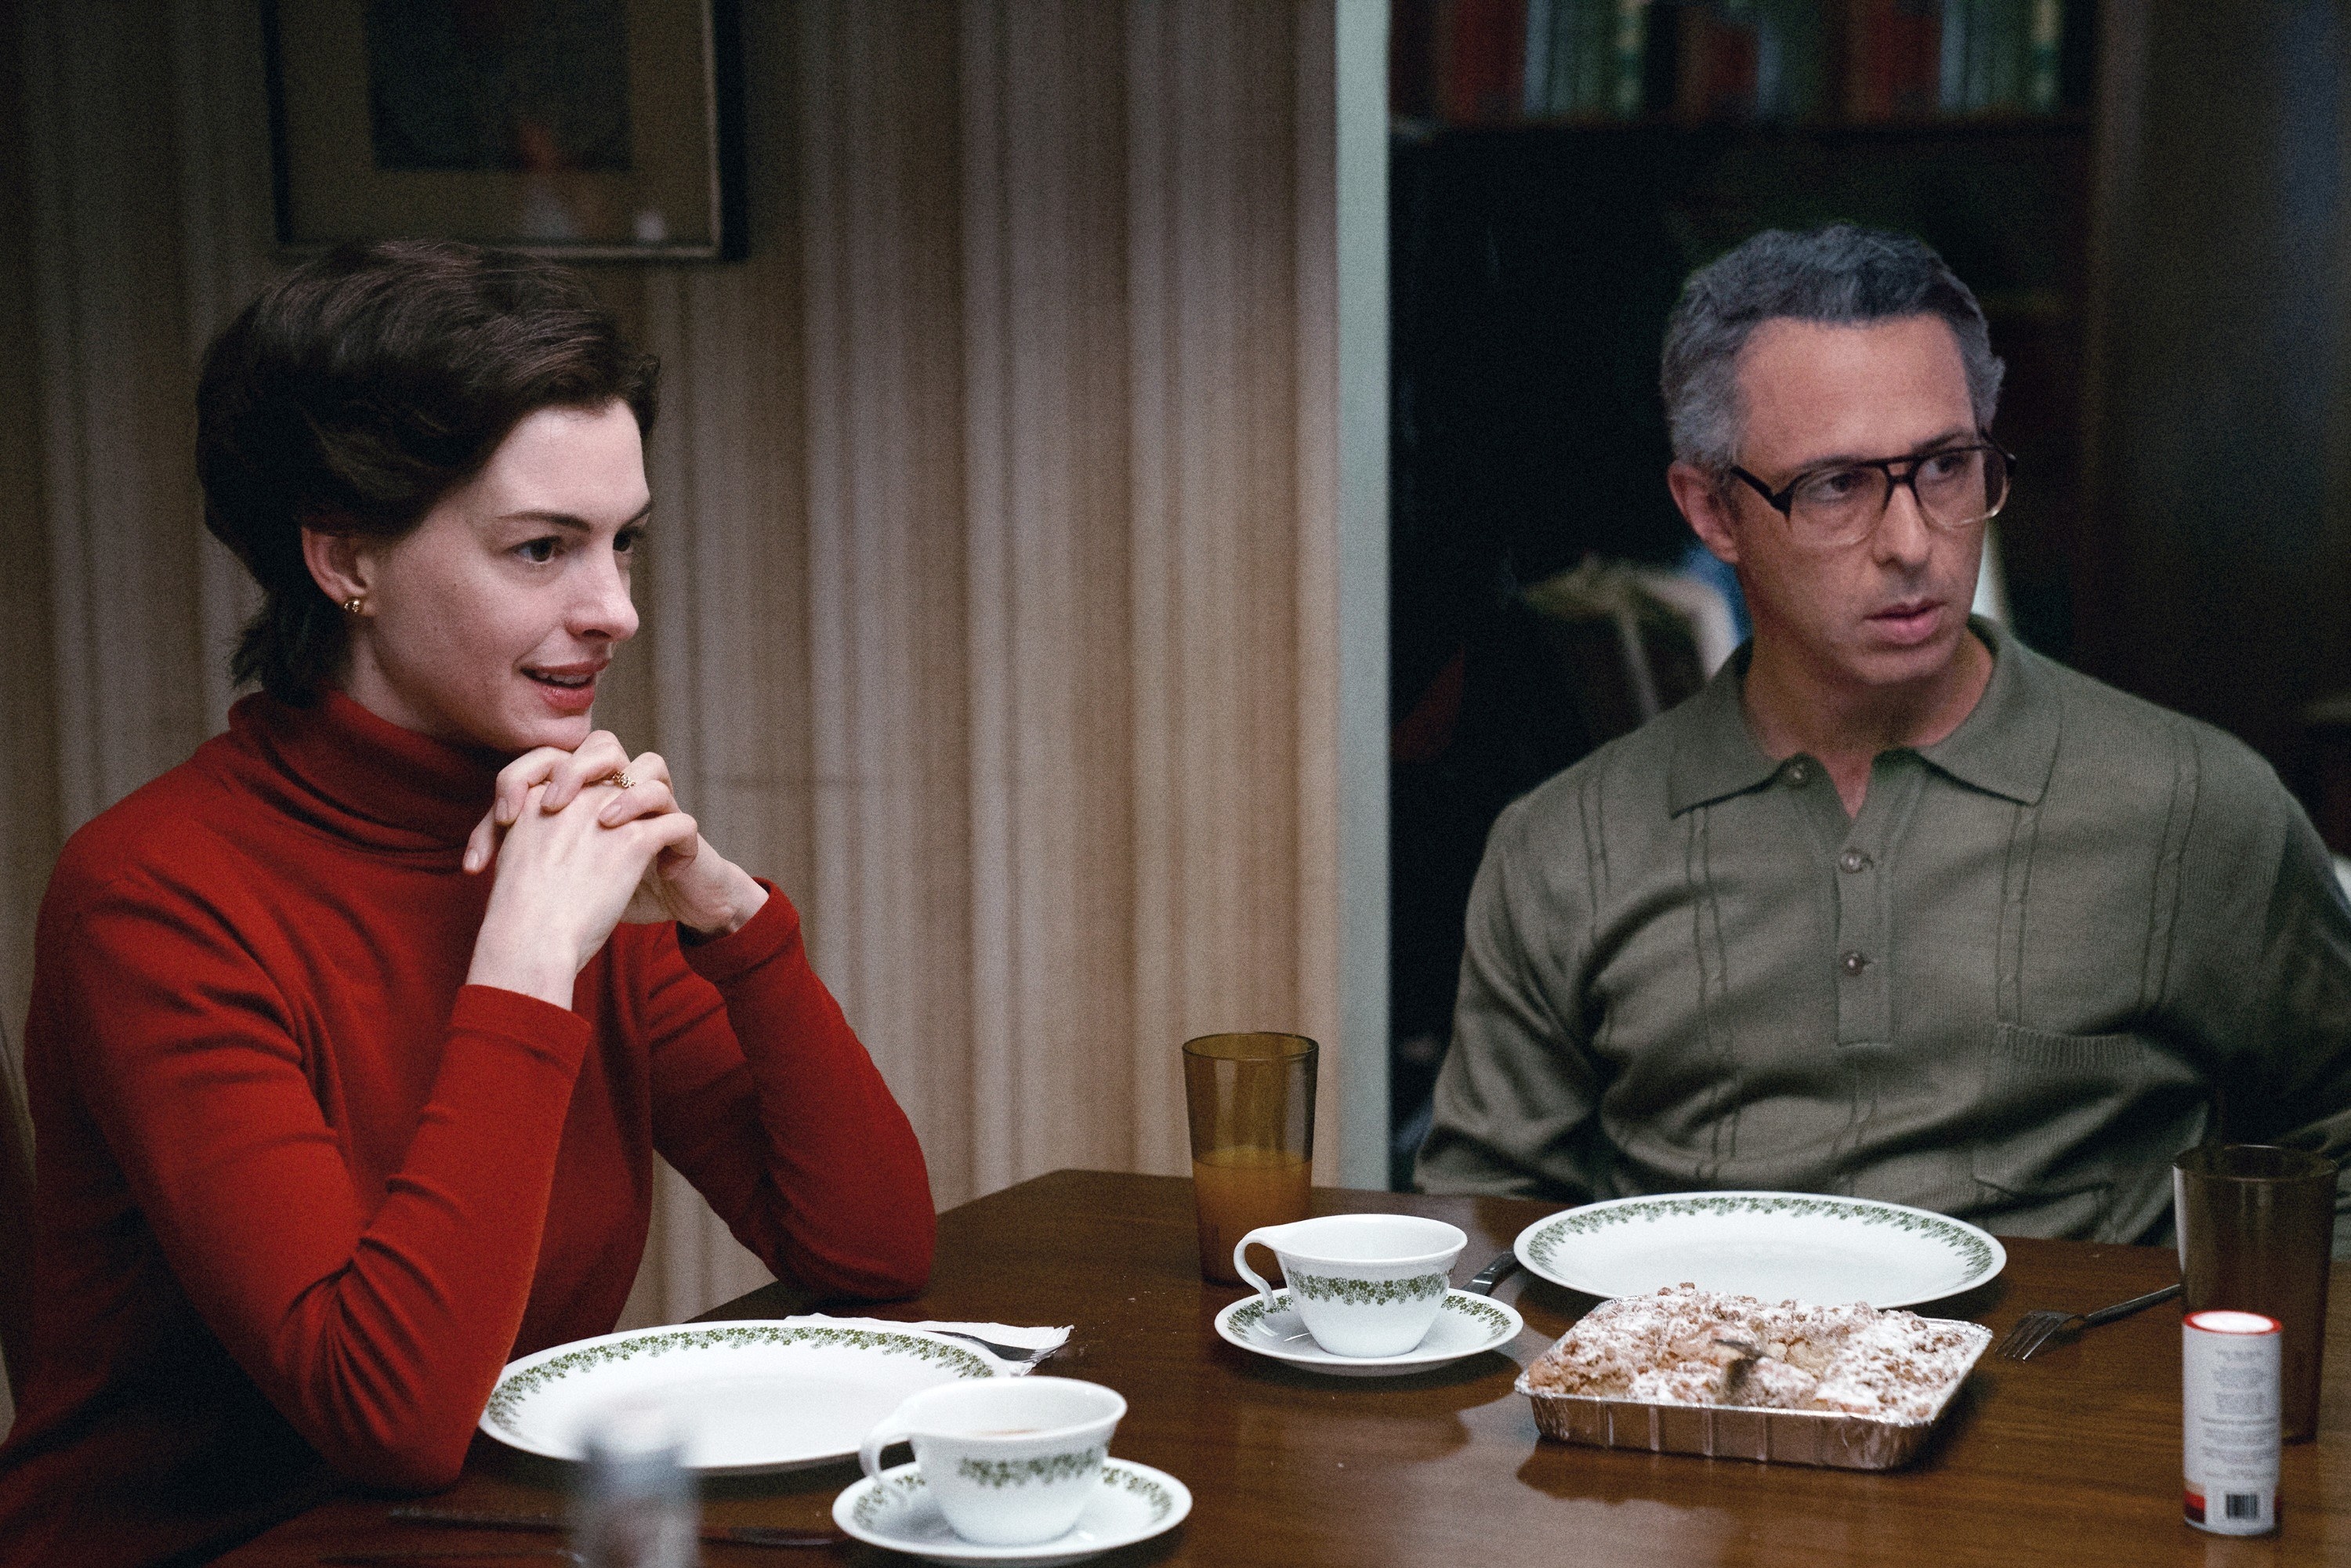 Anne Hathaway and Jeremy Strong sit at a dining room table